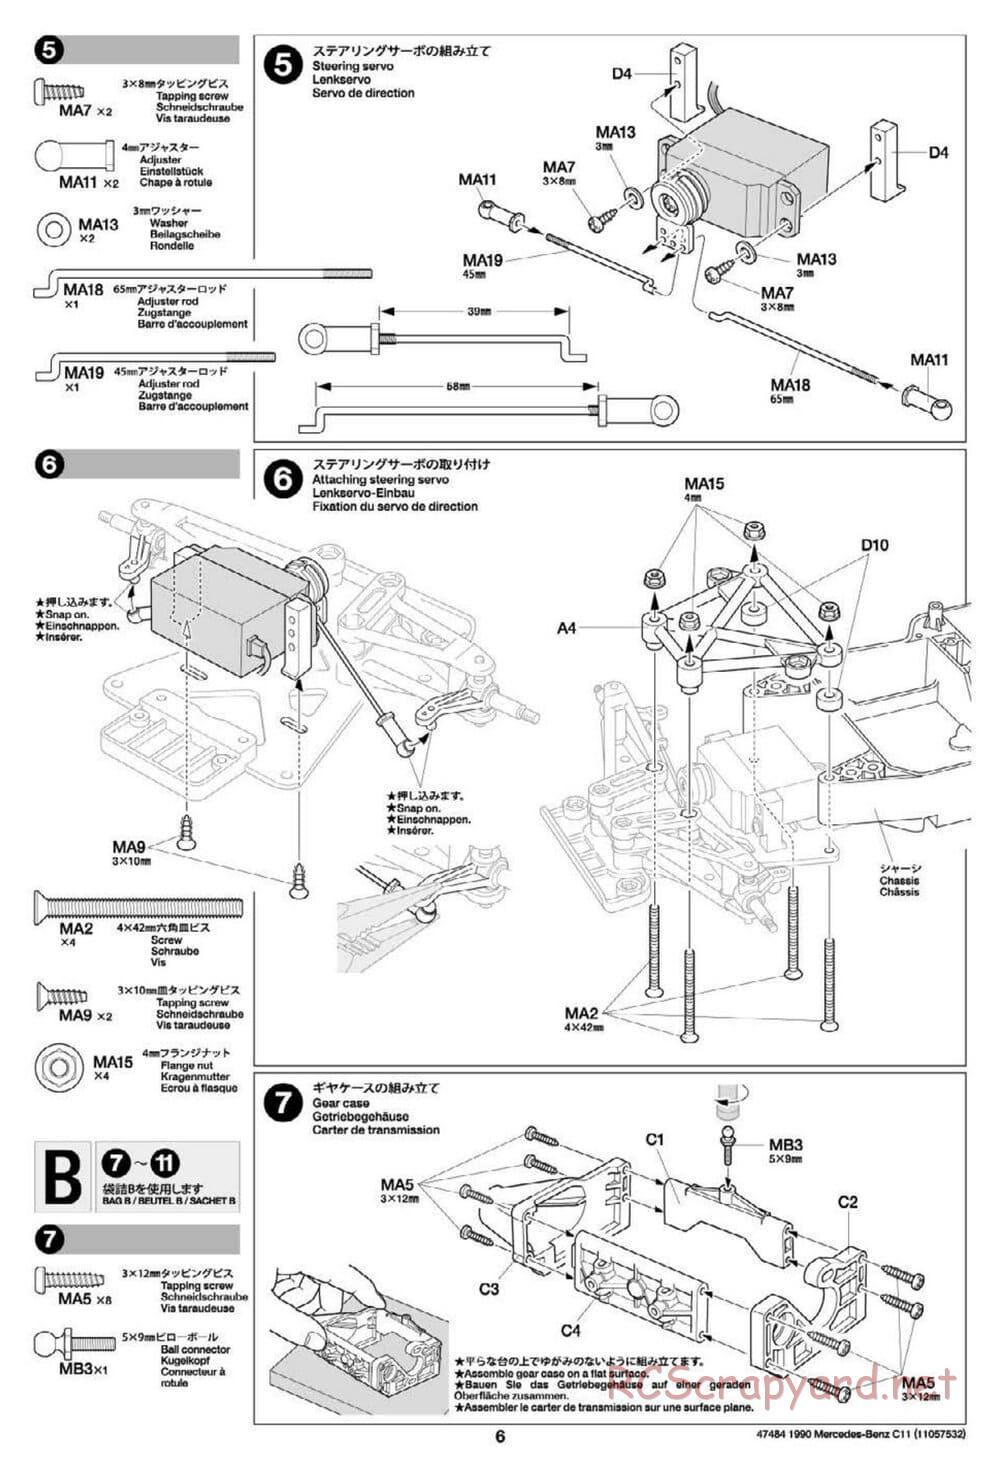 Tamiya - 1990 Mercedes-Benz C11 - Group-C Chassis - Manual - Page 6